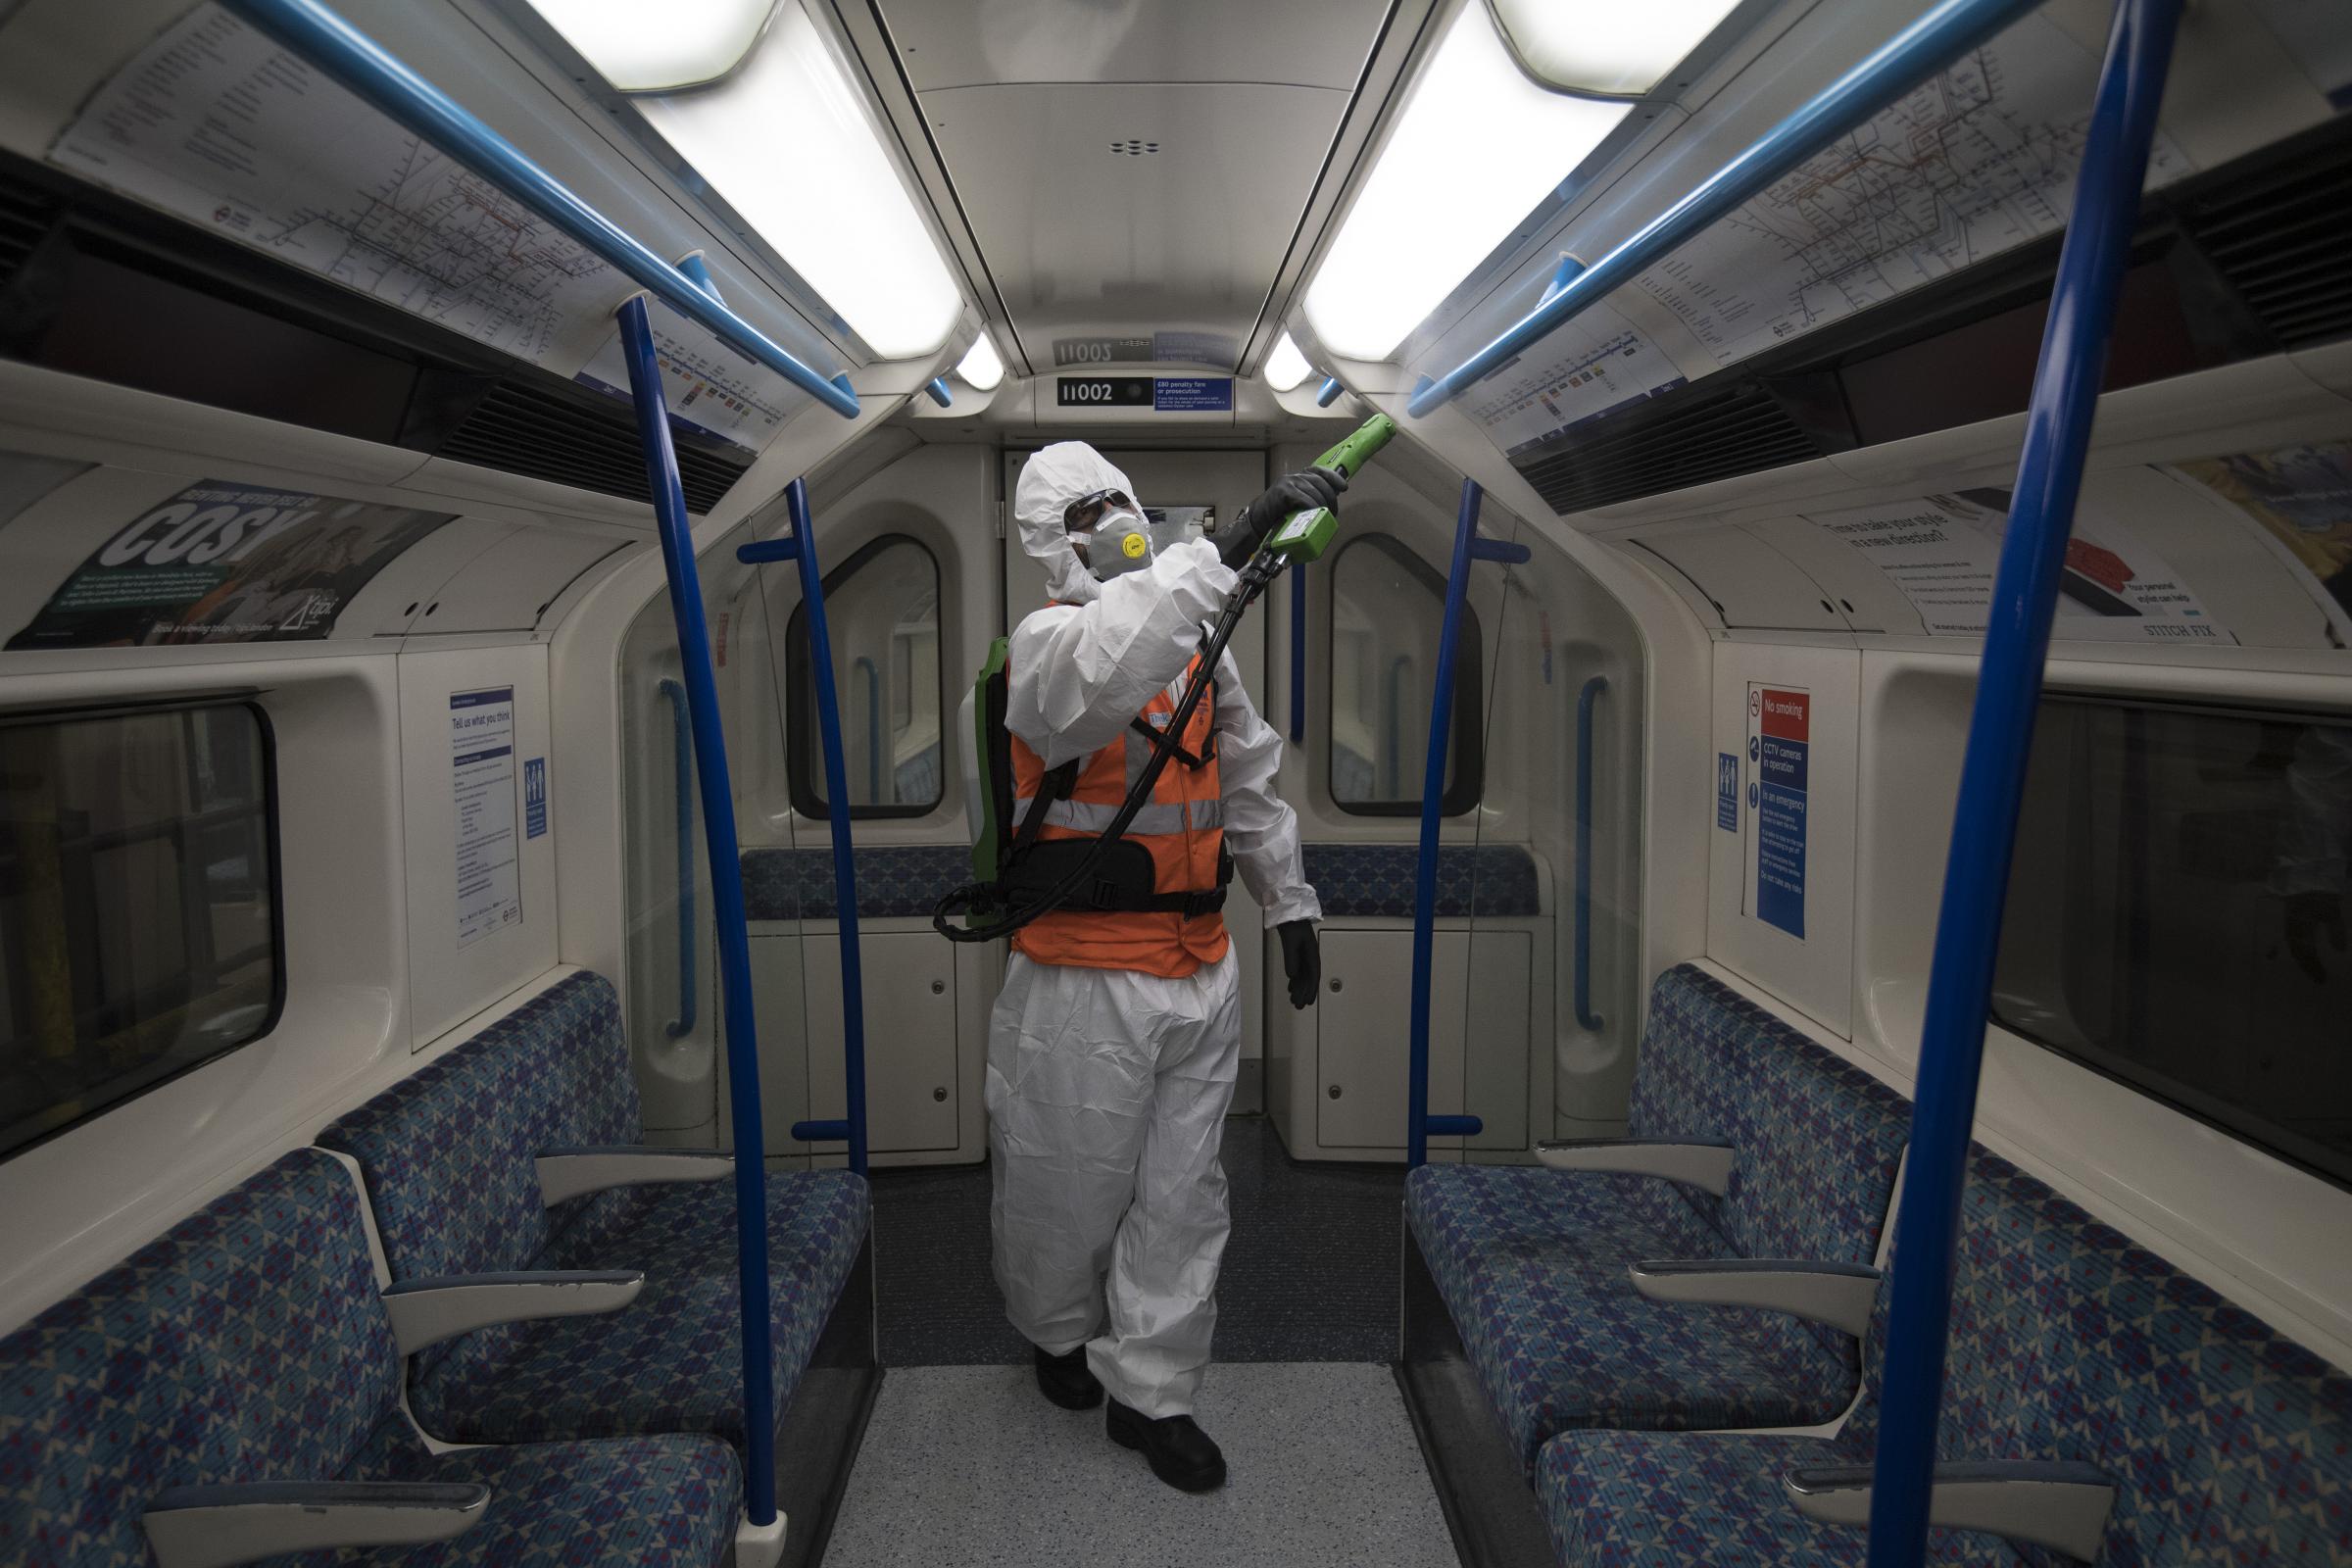 Hospital grade cleaning is being used to clean TfL services (Photo: PA)